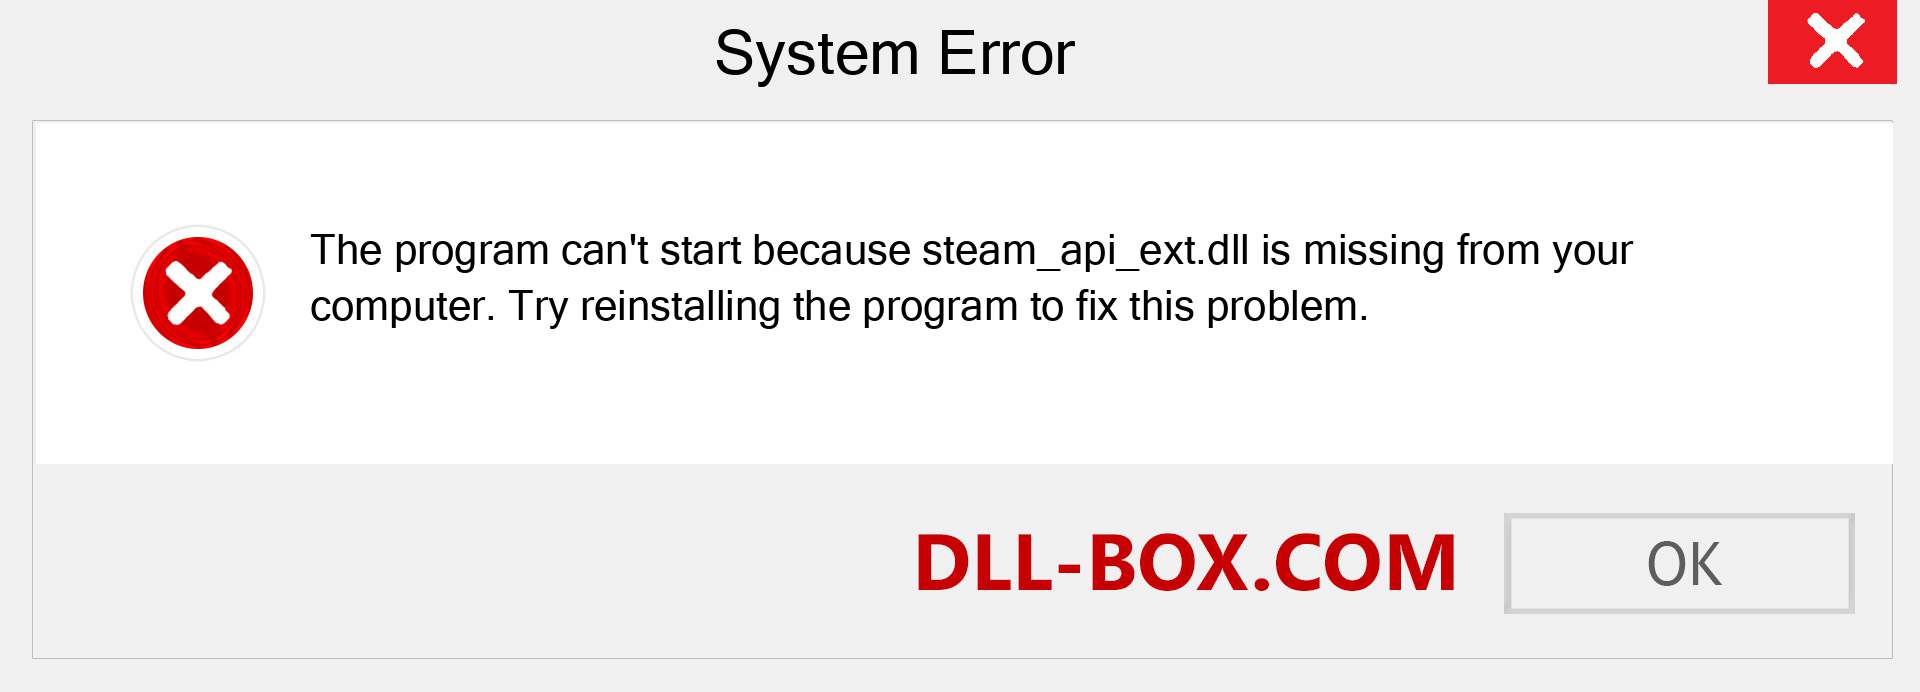  steam_api_ext.dll file is missing?. Download for Windows 7, 8, 10 - Fix  steam_api_ext dll Missing Error on Windows, photos, images